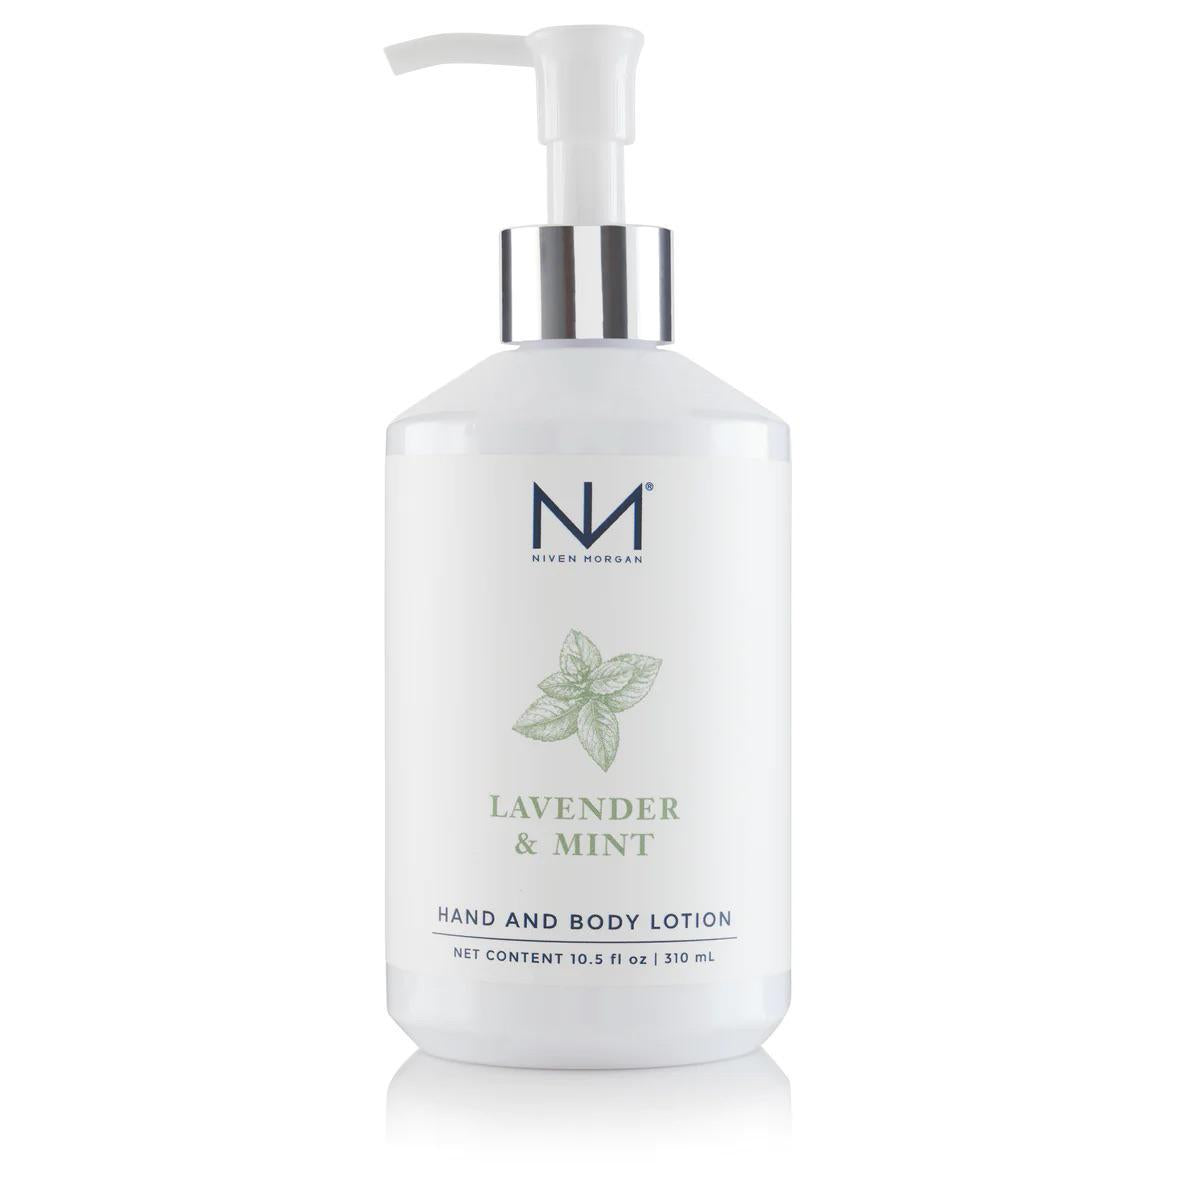 NM Lavender & Mint Hand and Body Lotion 10.5oz